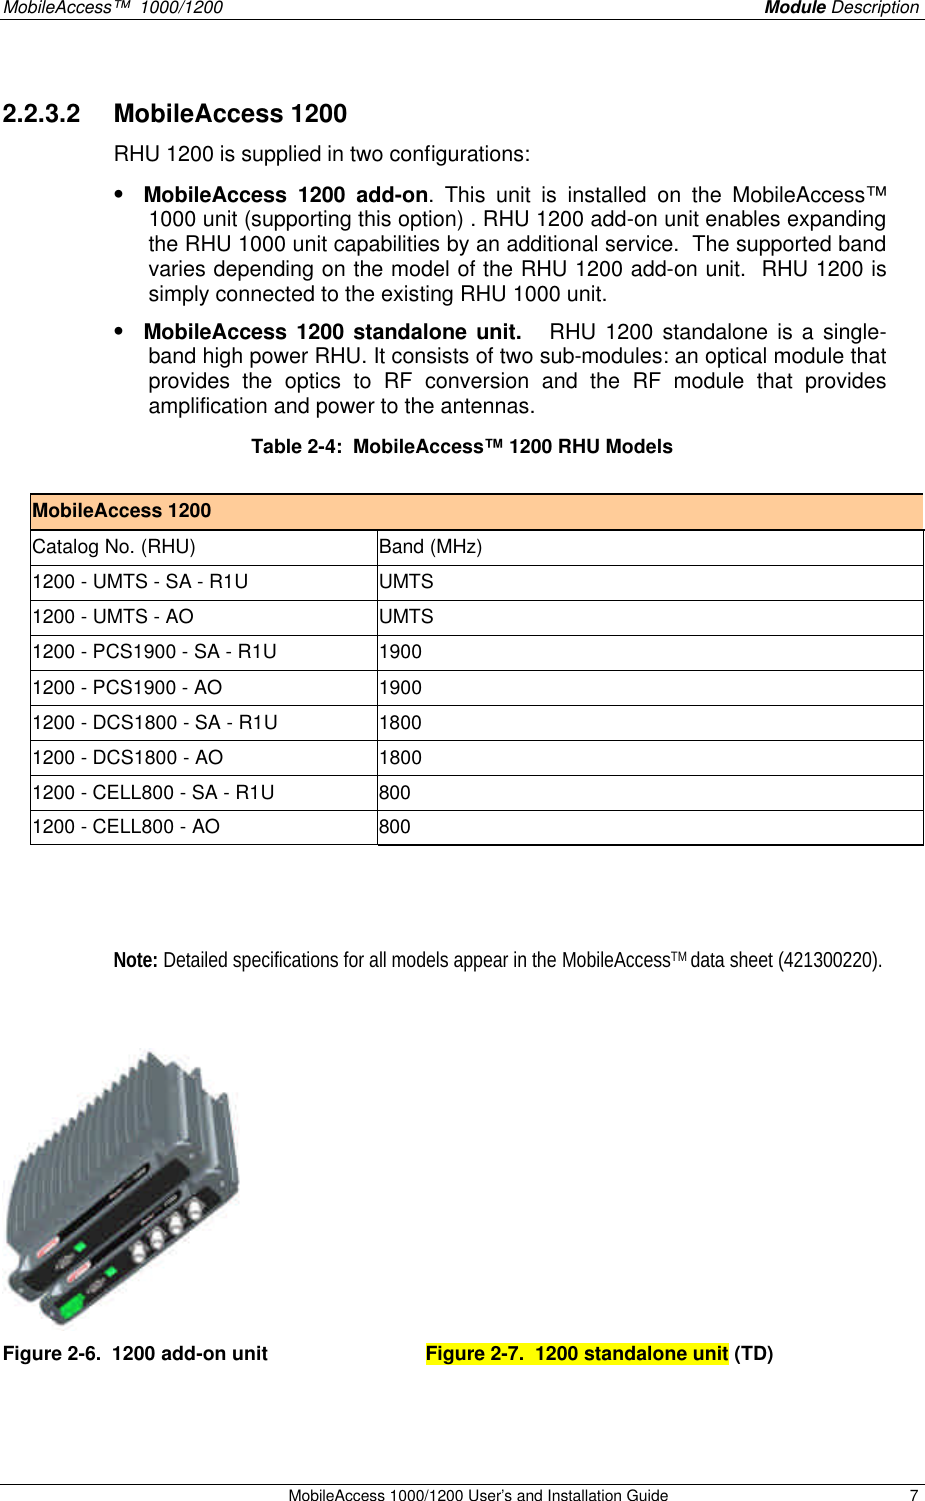 MobileAccess™  1000/1200    Module Description  MobileAccess 1000/1200 User’s and Installation Guide 7 2.2.3.2  MobileAccess 1200 RHU 1200 is supplied in two configurations: • MobileAccess 1200 add-on. This unit is installed on the MobileAccess™ 1000 unit (supporting this option) . RHU 1200 add-on unit enables expanding the RHU 1000 unit capabilities by an additional service.  The supported band varies depending on the model of the RHU 1200 add-on unit.  RHU 1200 is simply connected to the existing RHU 1000 unit.  • MobileAccess 1200 standalone unit.   RHU 1200 standalone is a single-band high power RHU. It consists of two sub-modules: an optical module that provides the optics to RF conversion and the RF module that provides amplification and power to the antennas. Table 2-4:  MobileAccess™ 1200 RHU Models   MobileAccess 1200 Catalog No. (RHU) Band (MHz) 1200 - UMTS - SA - R1U UMTS 1200 - UMTS - AO UMTS 1200 - PCS1900 - SA - R1U 1900 1200 - PCS1900 - AO 1900 1200 - DCS1800 - SA - R1U 1800 1200 - DCS1800 - AO 1800 1200 - CELL800 - SA - R1U 800 1200 - CELL800 - AO 800   Note: Detailed specifications for all models appear in the MobileAccessTM data sheet (421300220).   Figure 2-6.  1200 add-on unit     Figure 2-7.  1200 standalone unit (TD) 